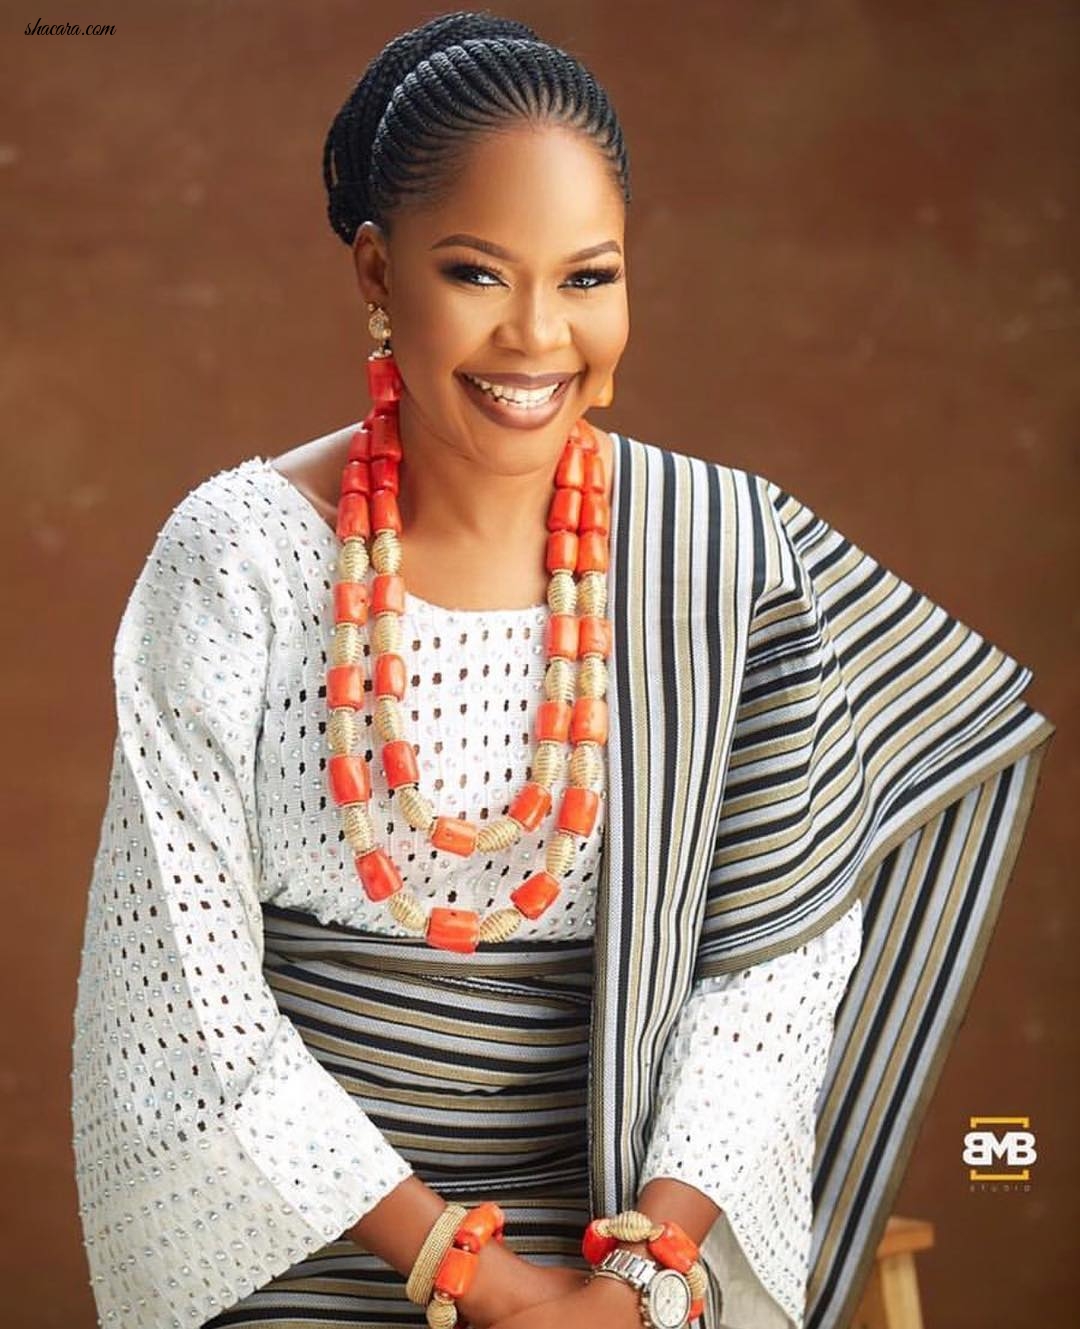 Fabric Entrepreneur, Abimbola Ipaye’s Latest Birthday Shoot Is The Definition Of Regal Beauty